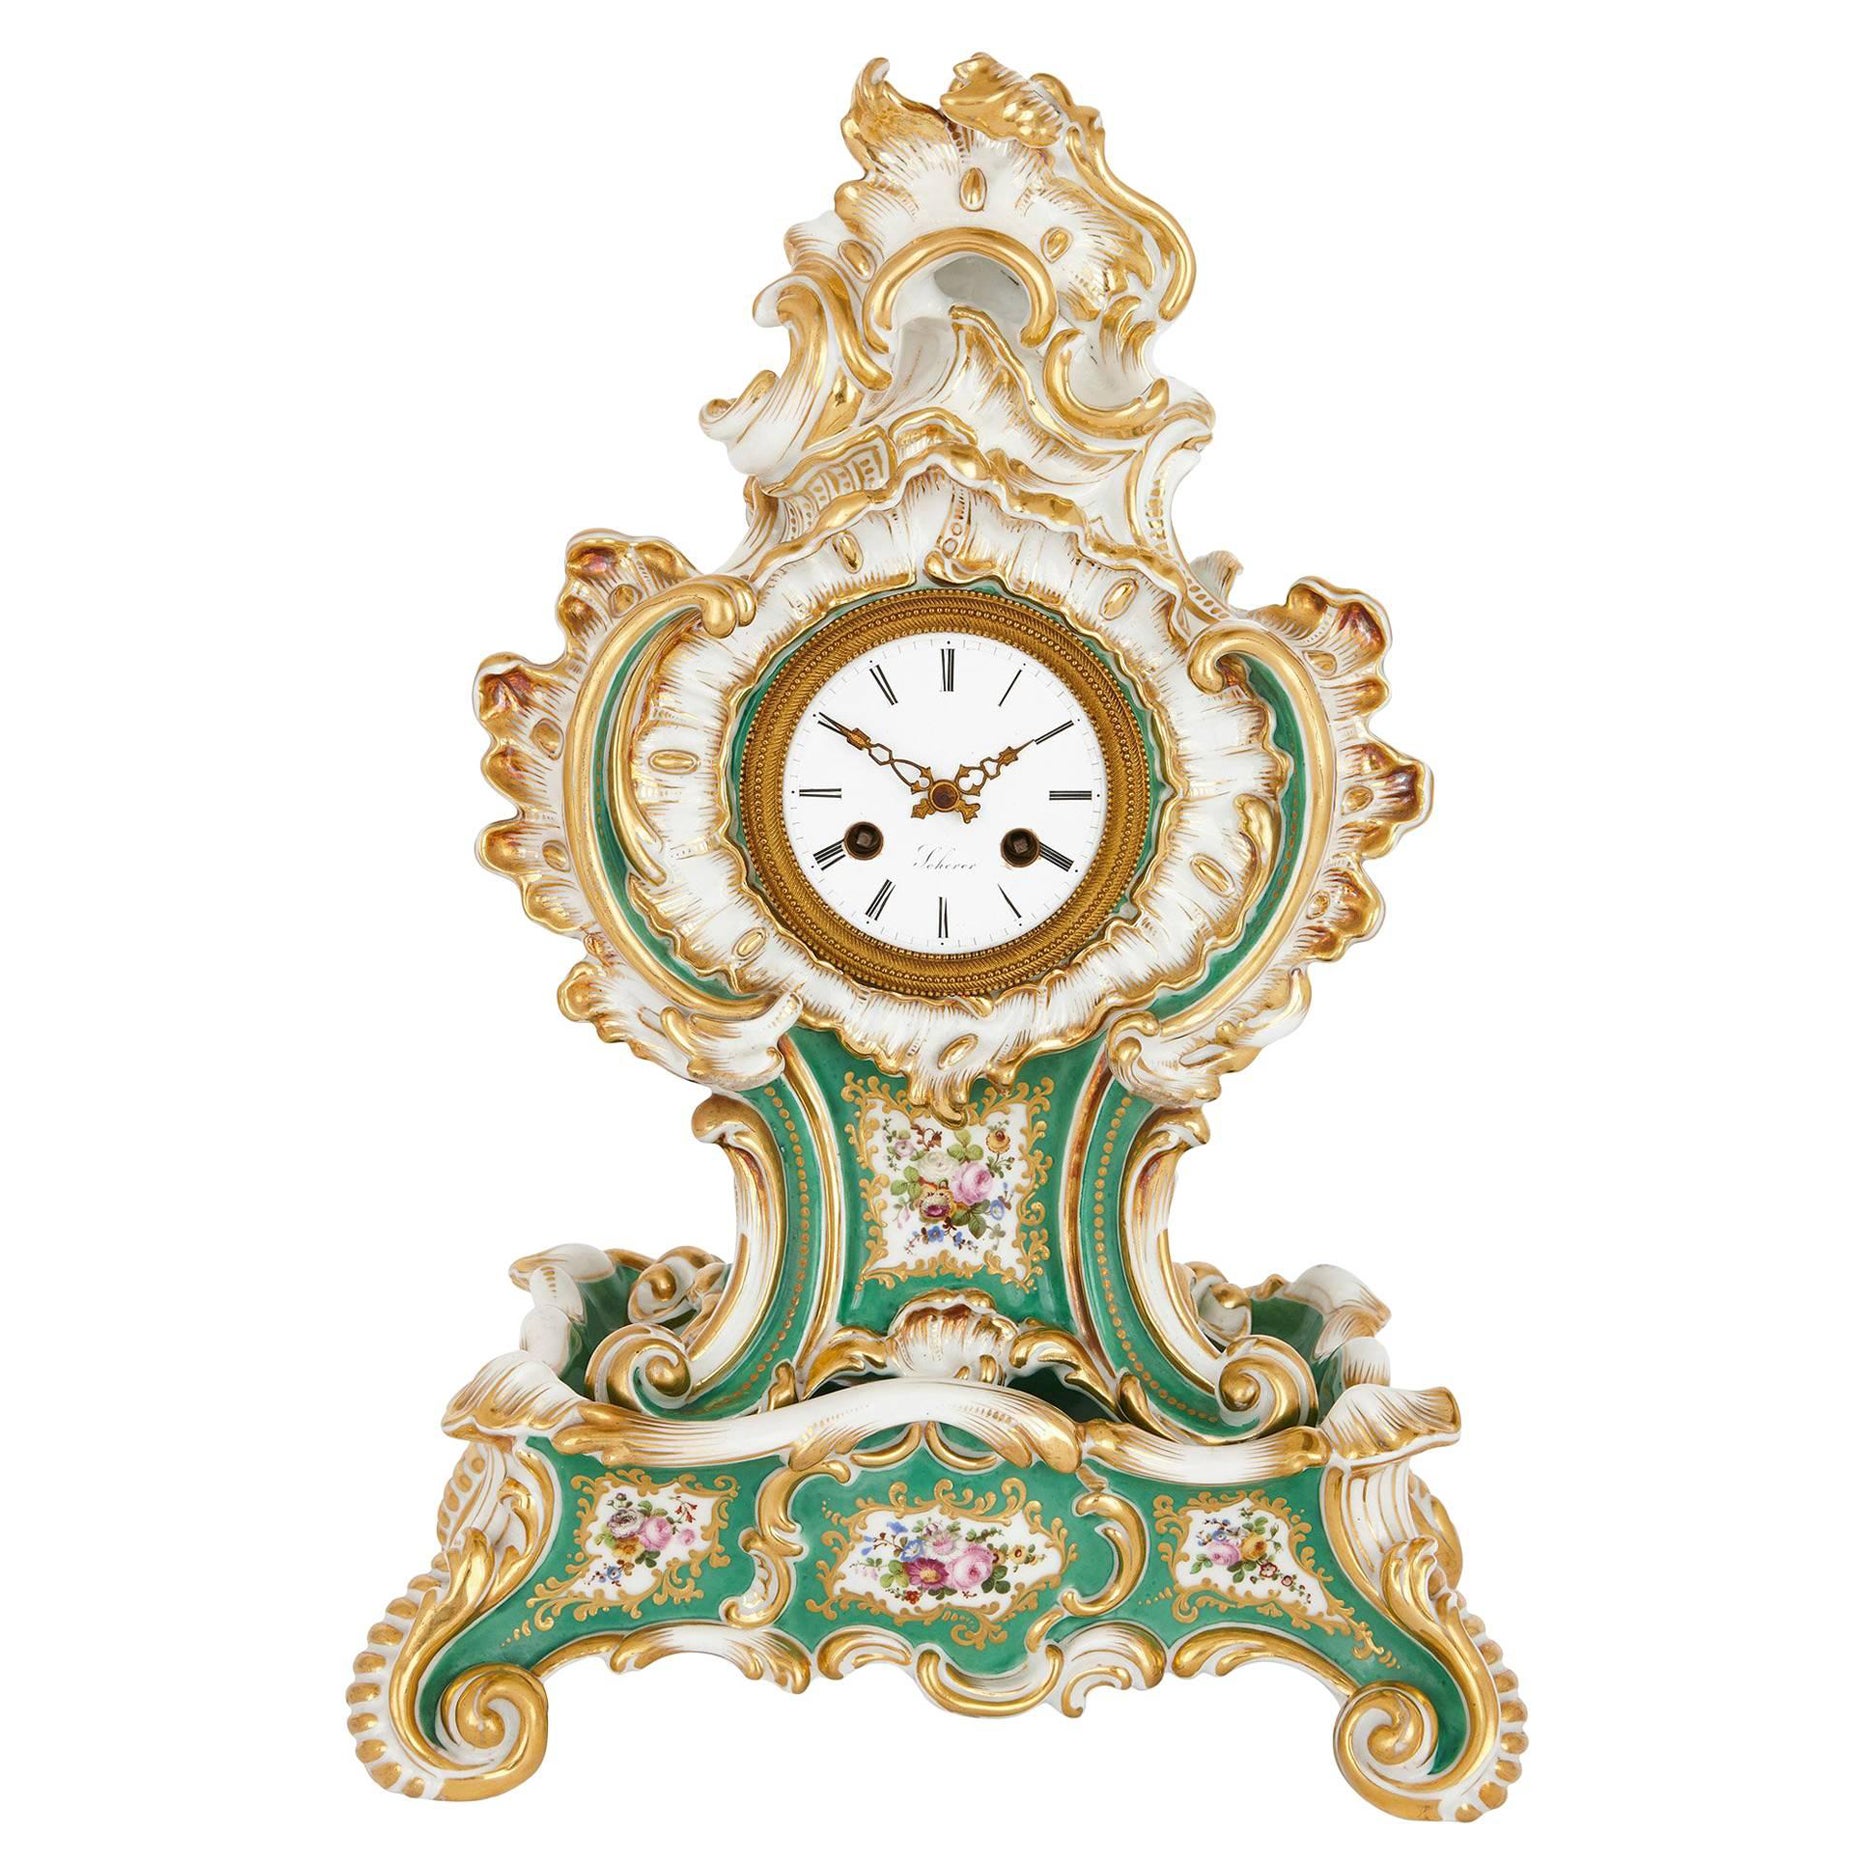 Porcelain Clock in the Louis XV Style by Jacob Petit